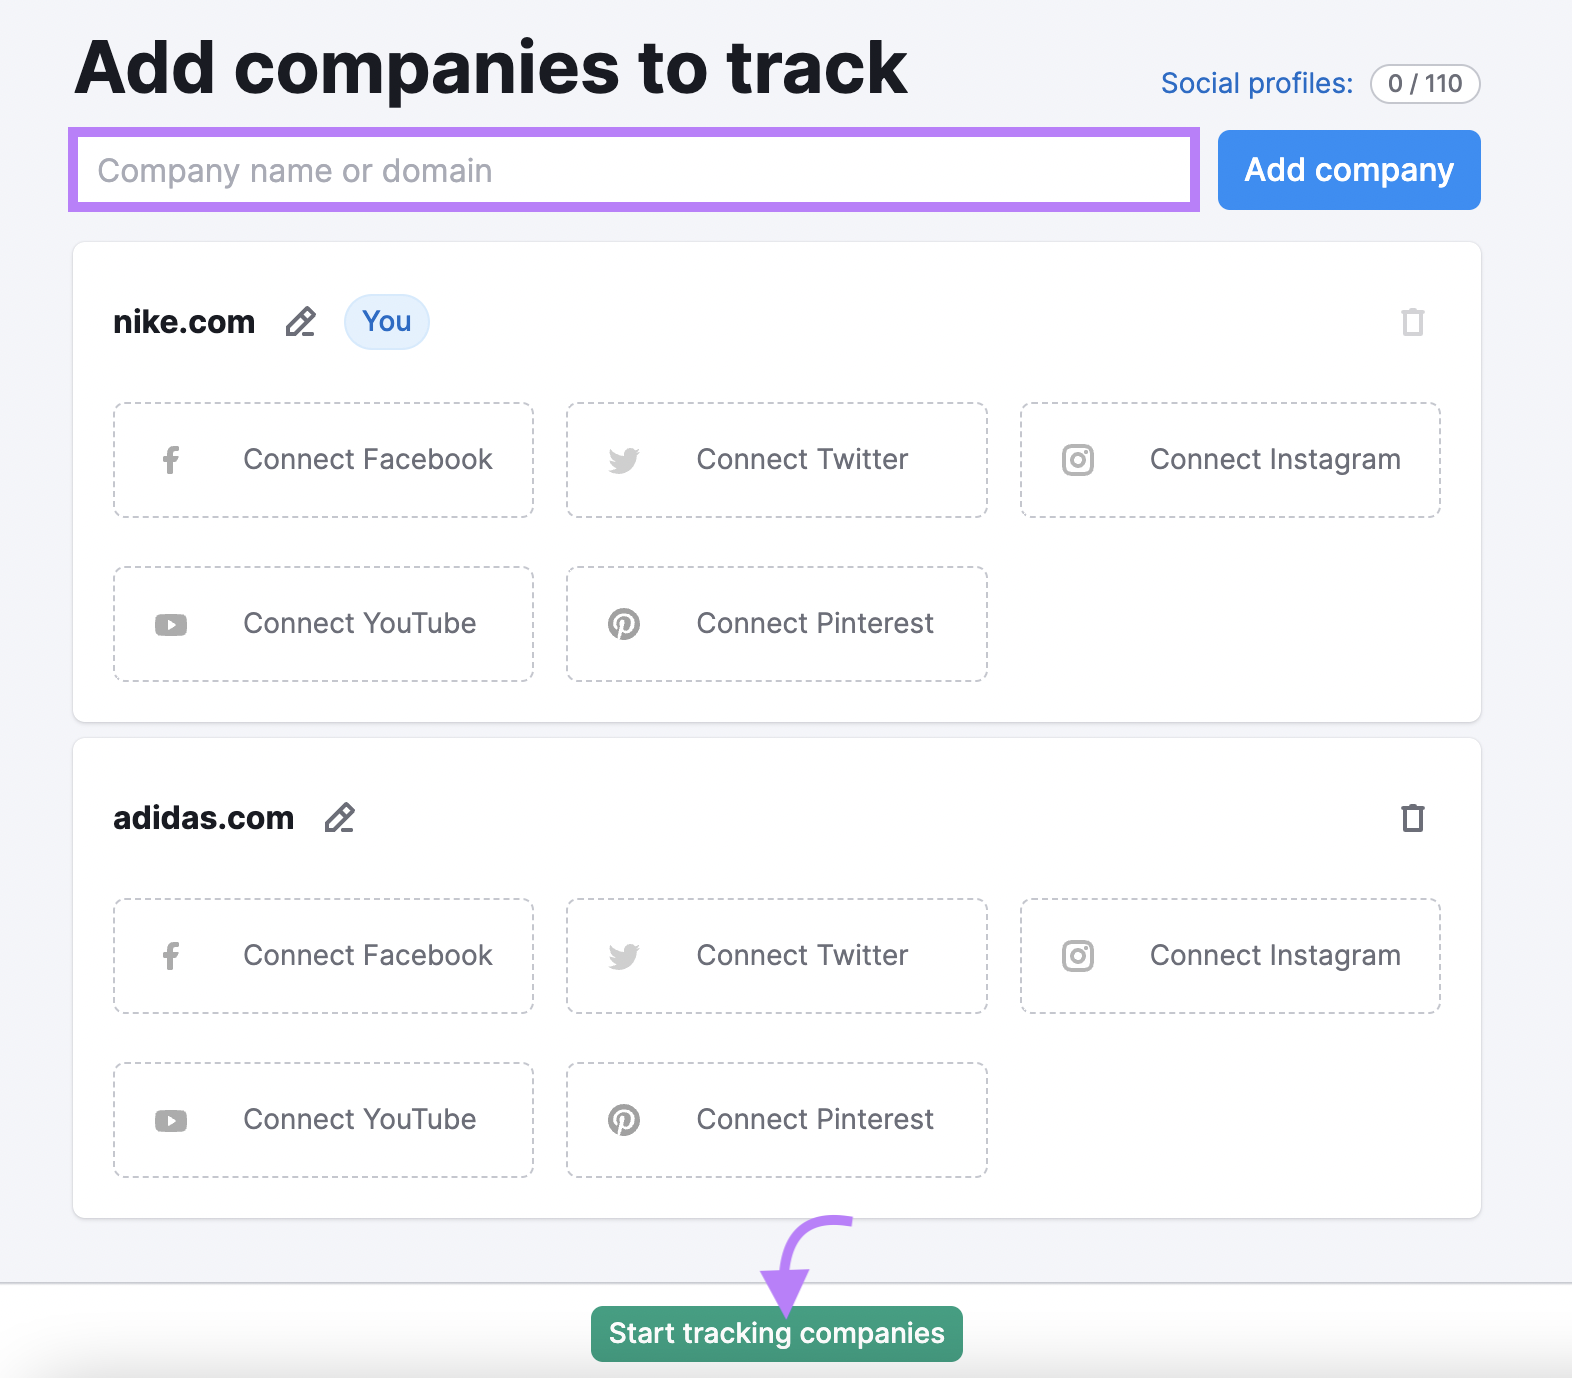 "Add companies to track" page in Social Tracker tool